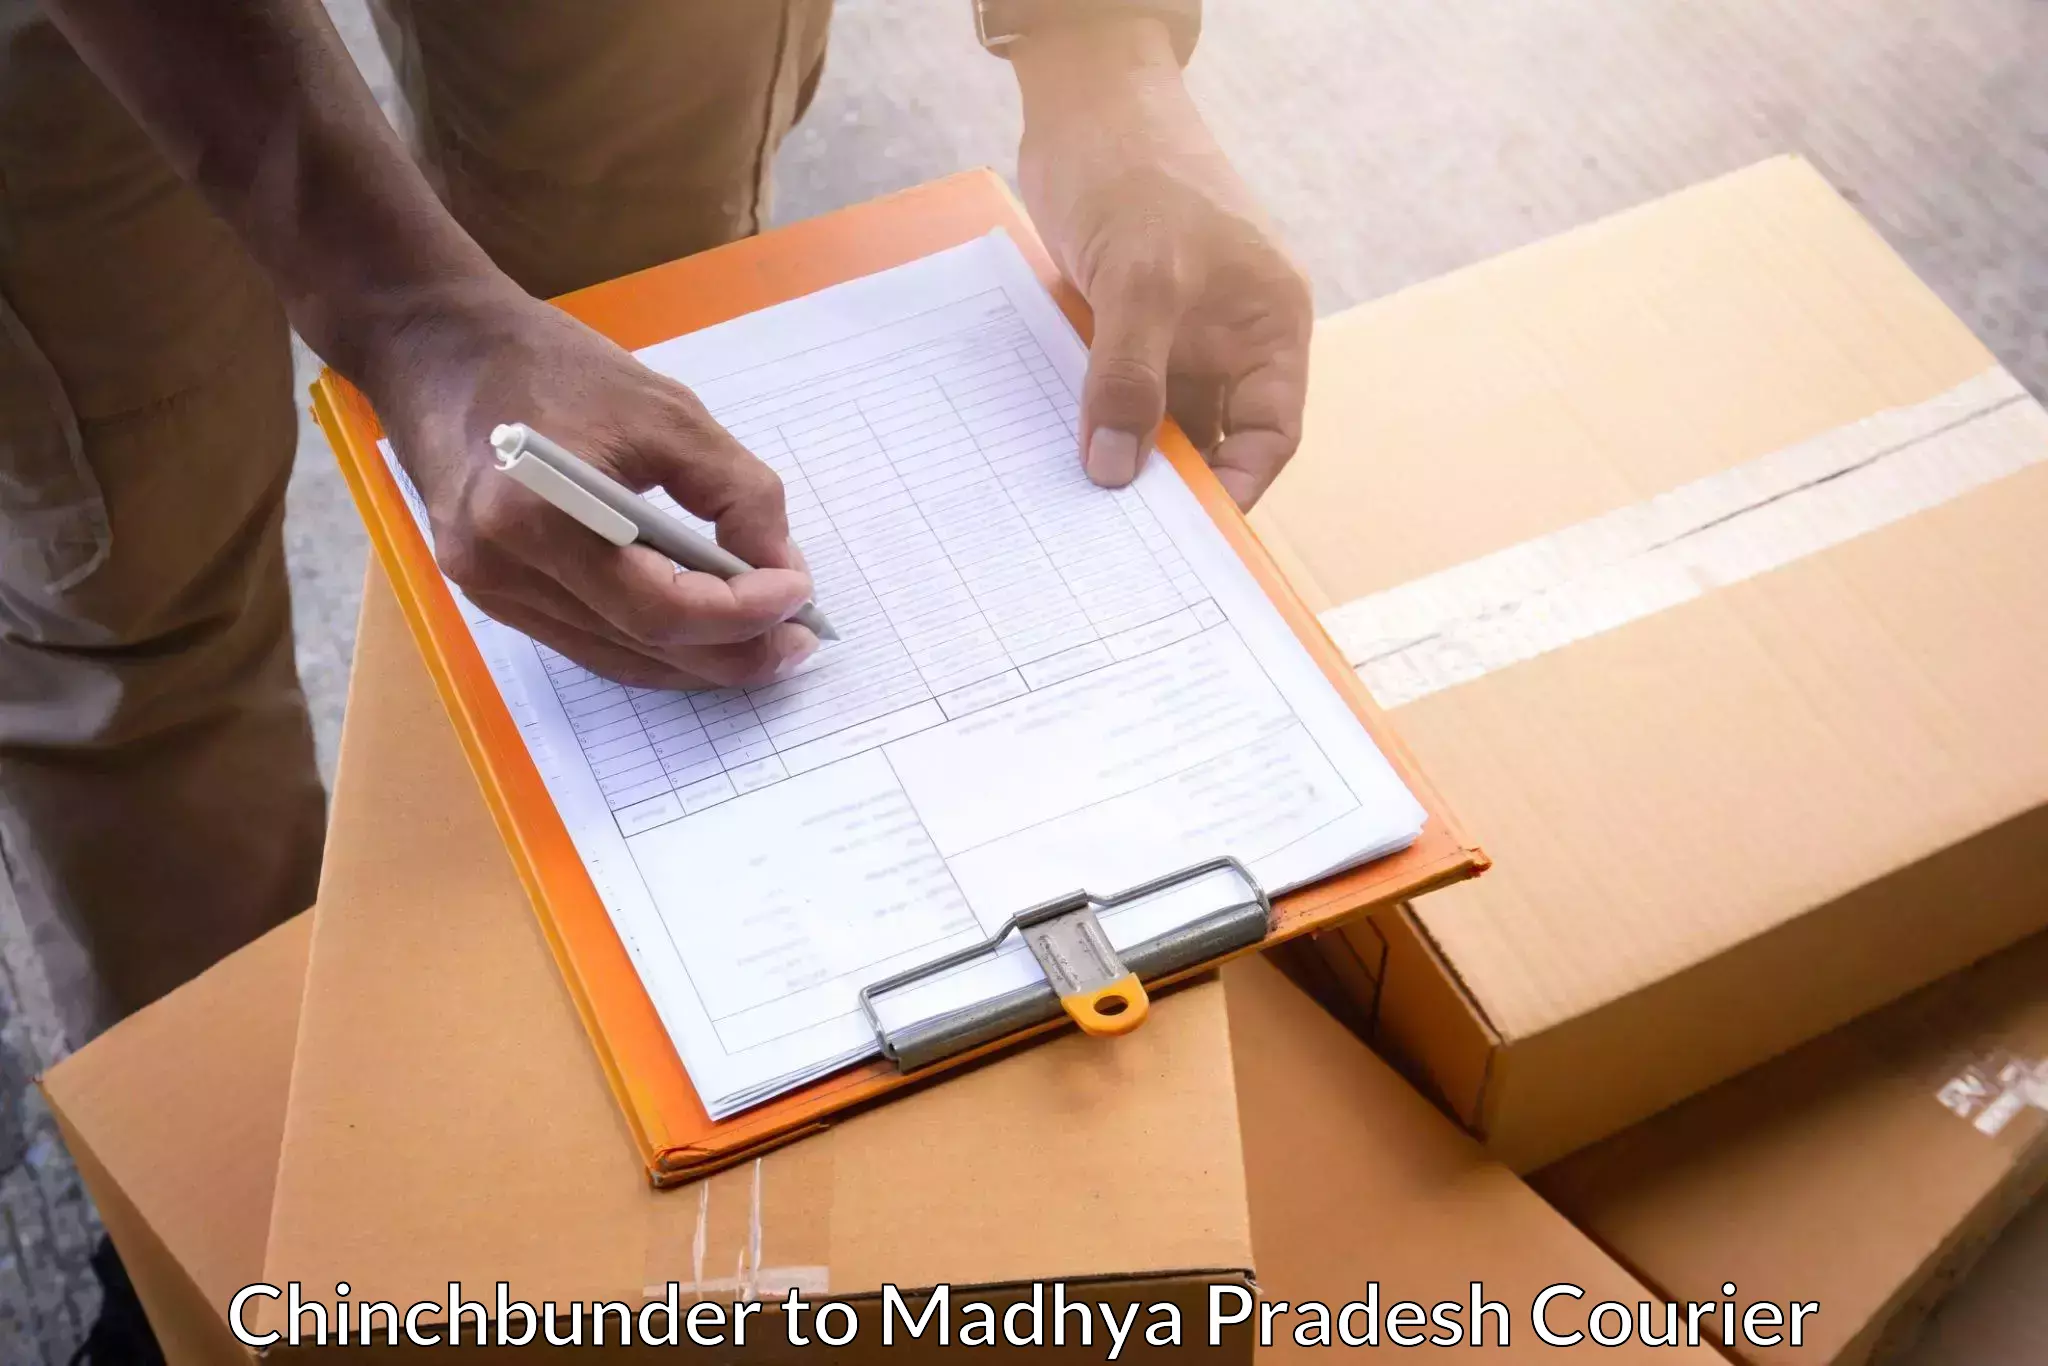 Parcel service for businesses Chinchbunder to Mandideep